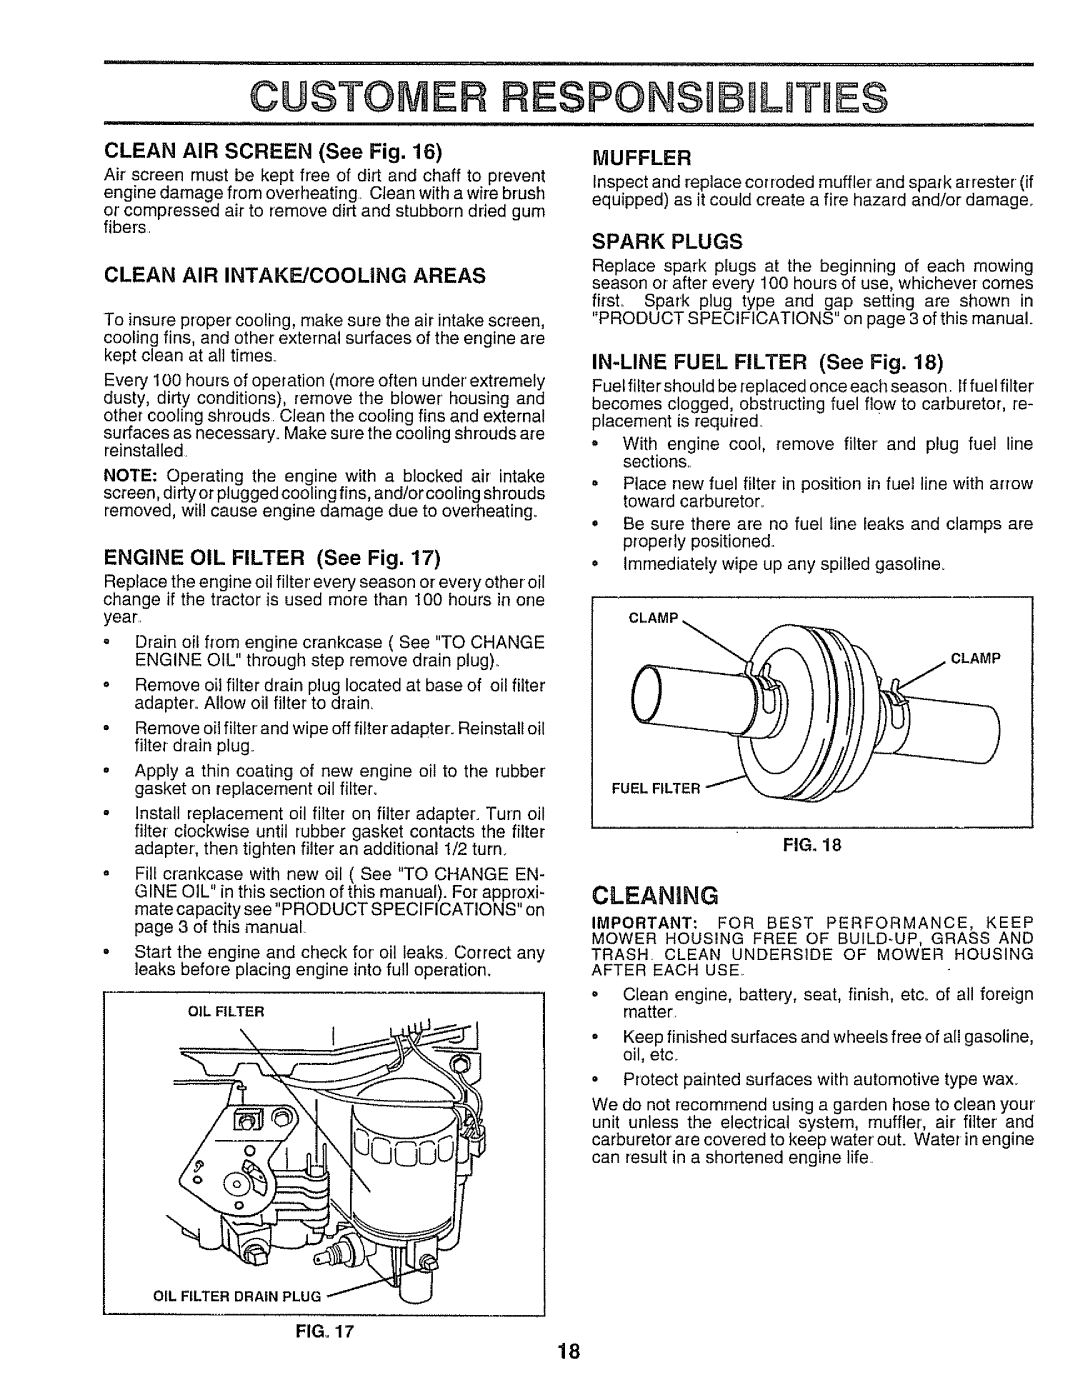 Sears 917.25545 CUSTOMER RESPONS BnL T ES, Cleaning, Clean Air Intake/Cooling Areas, ENGINE OIL FILTER See Fig, Sparkplugs 